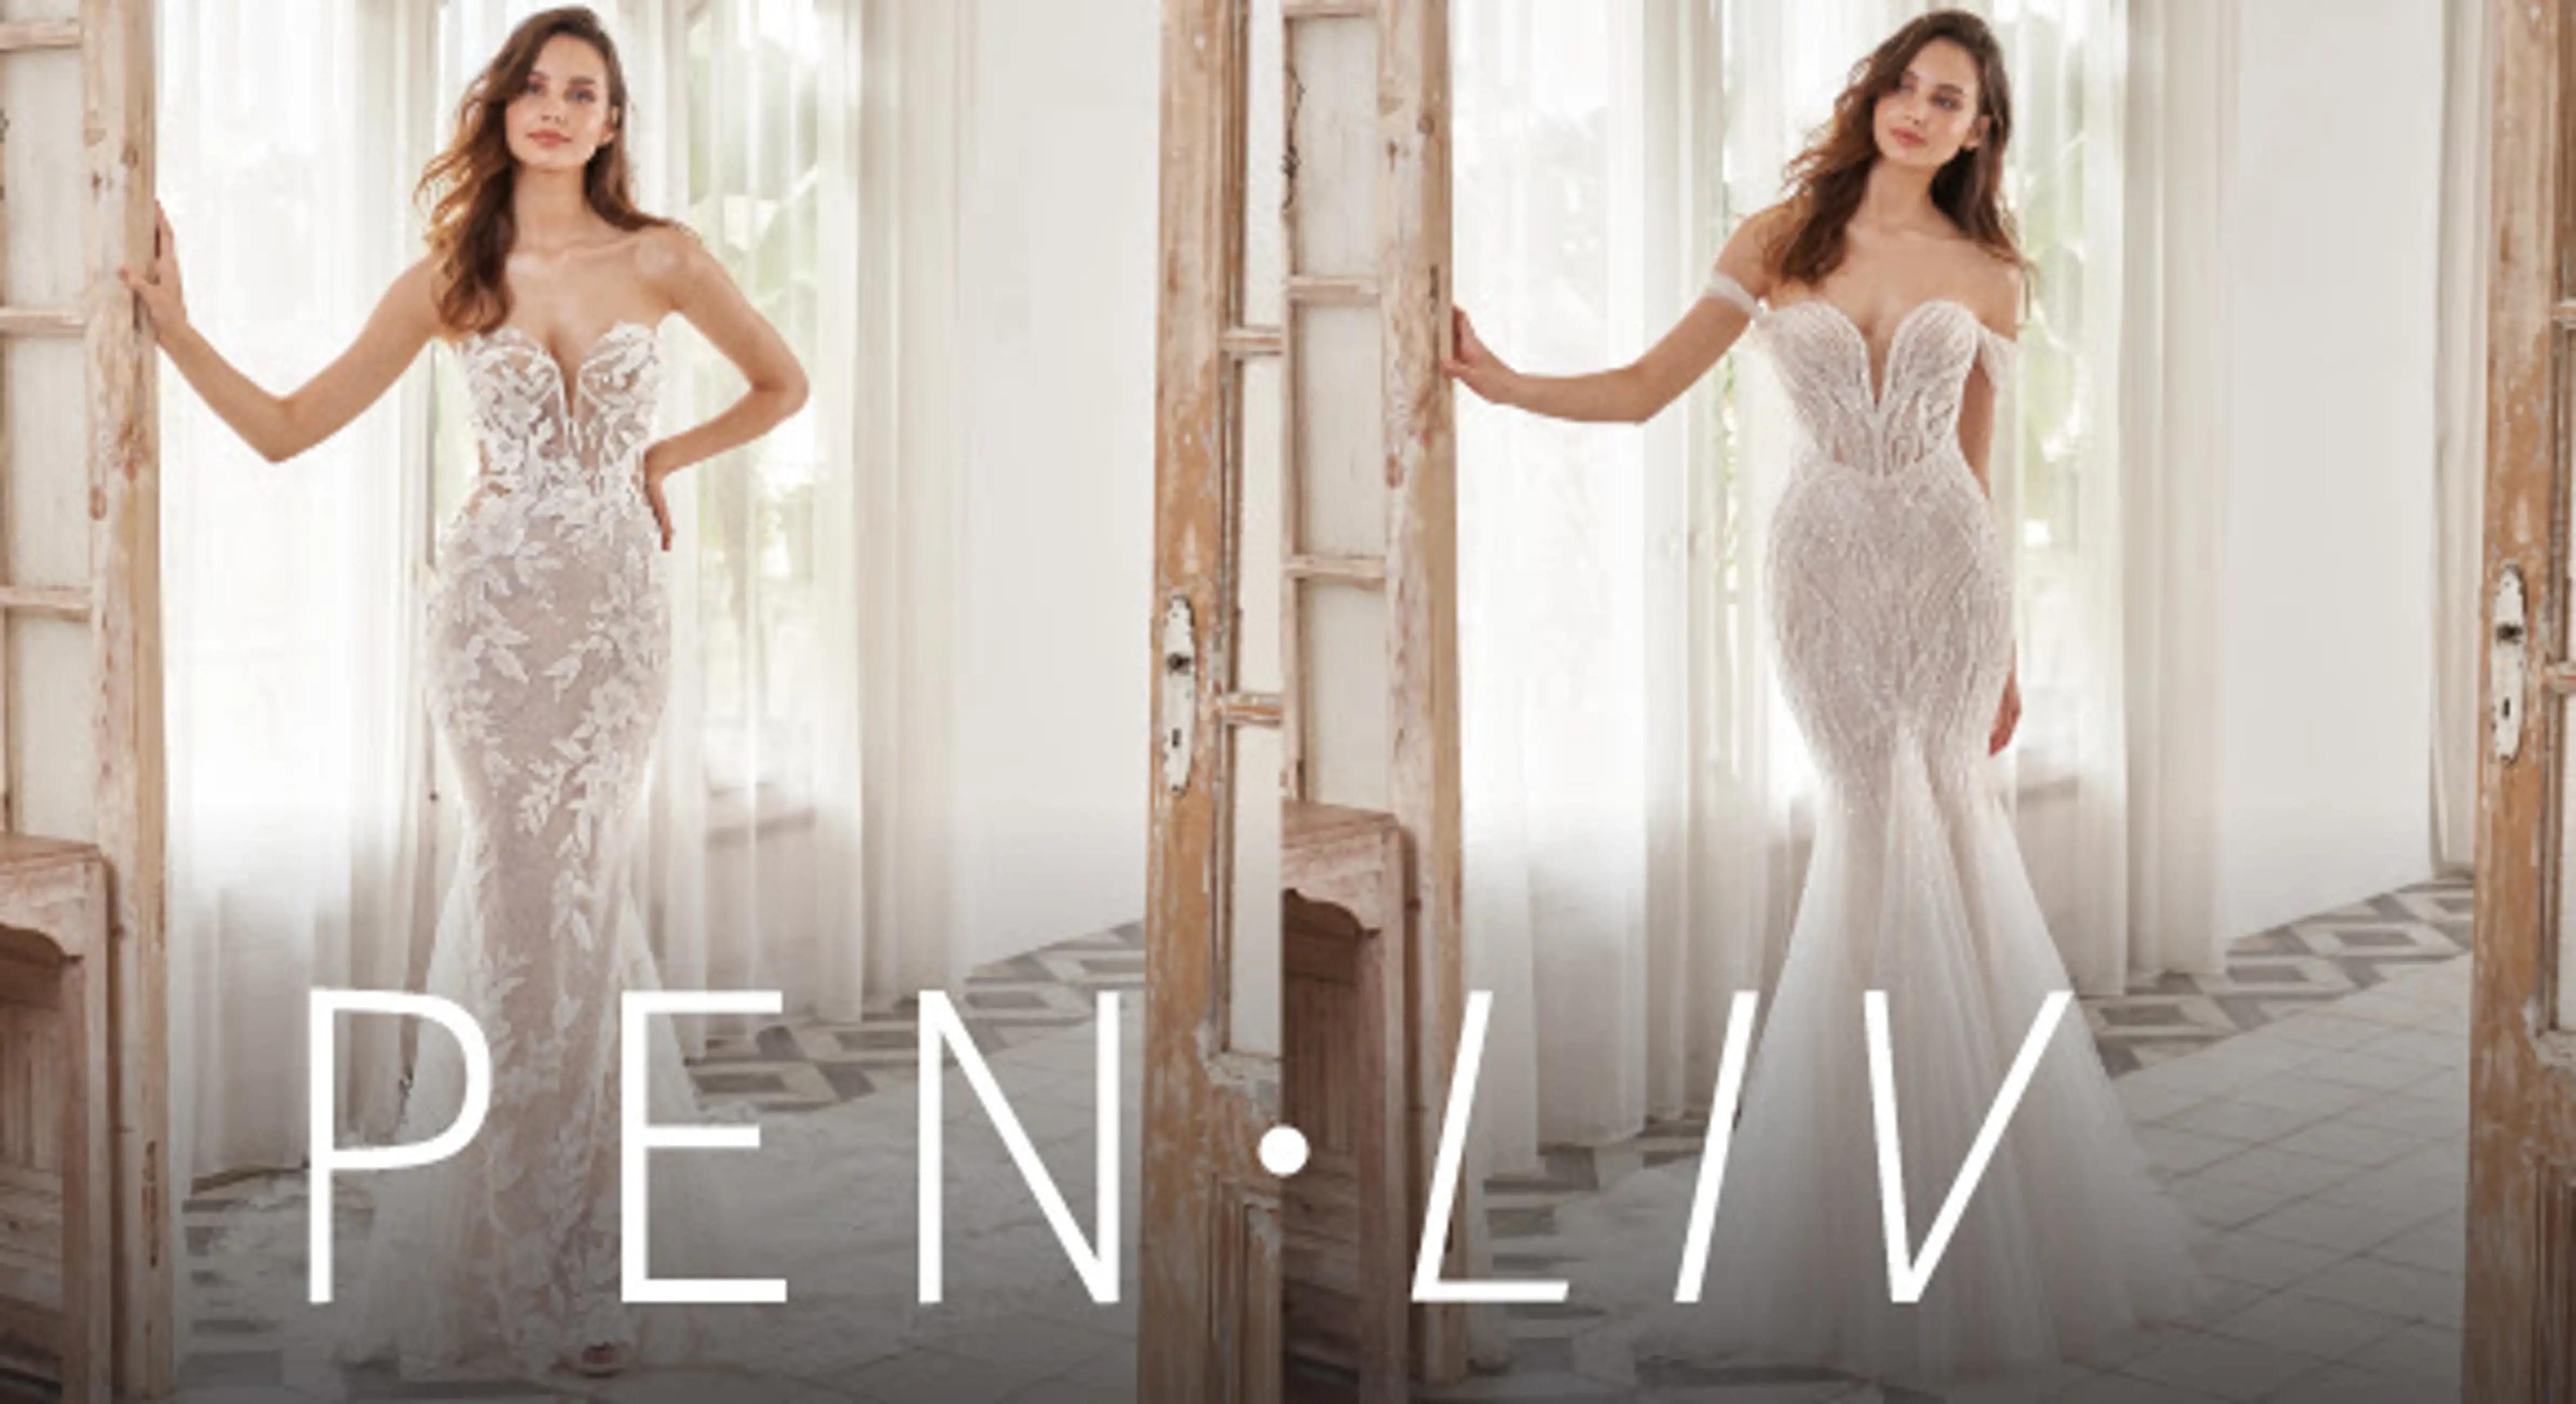 ENDED | Introducing Pen · Liv by Enzoani 2023 Collection Preview